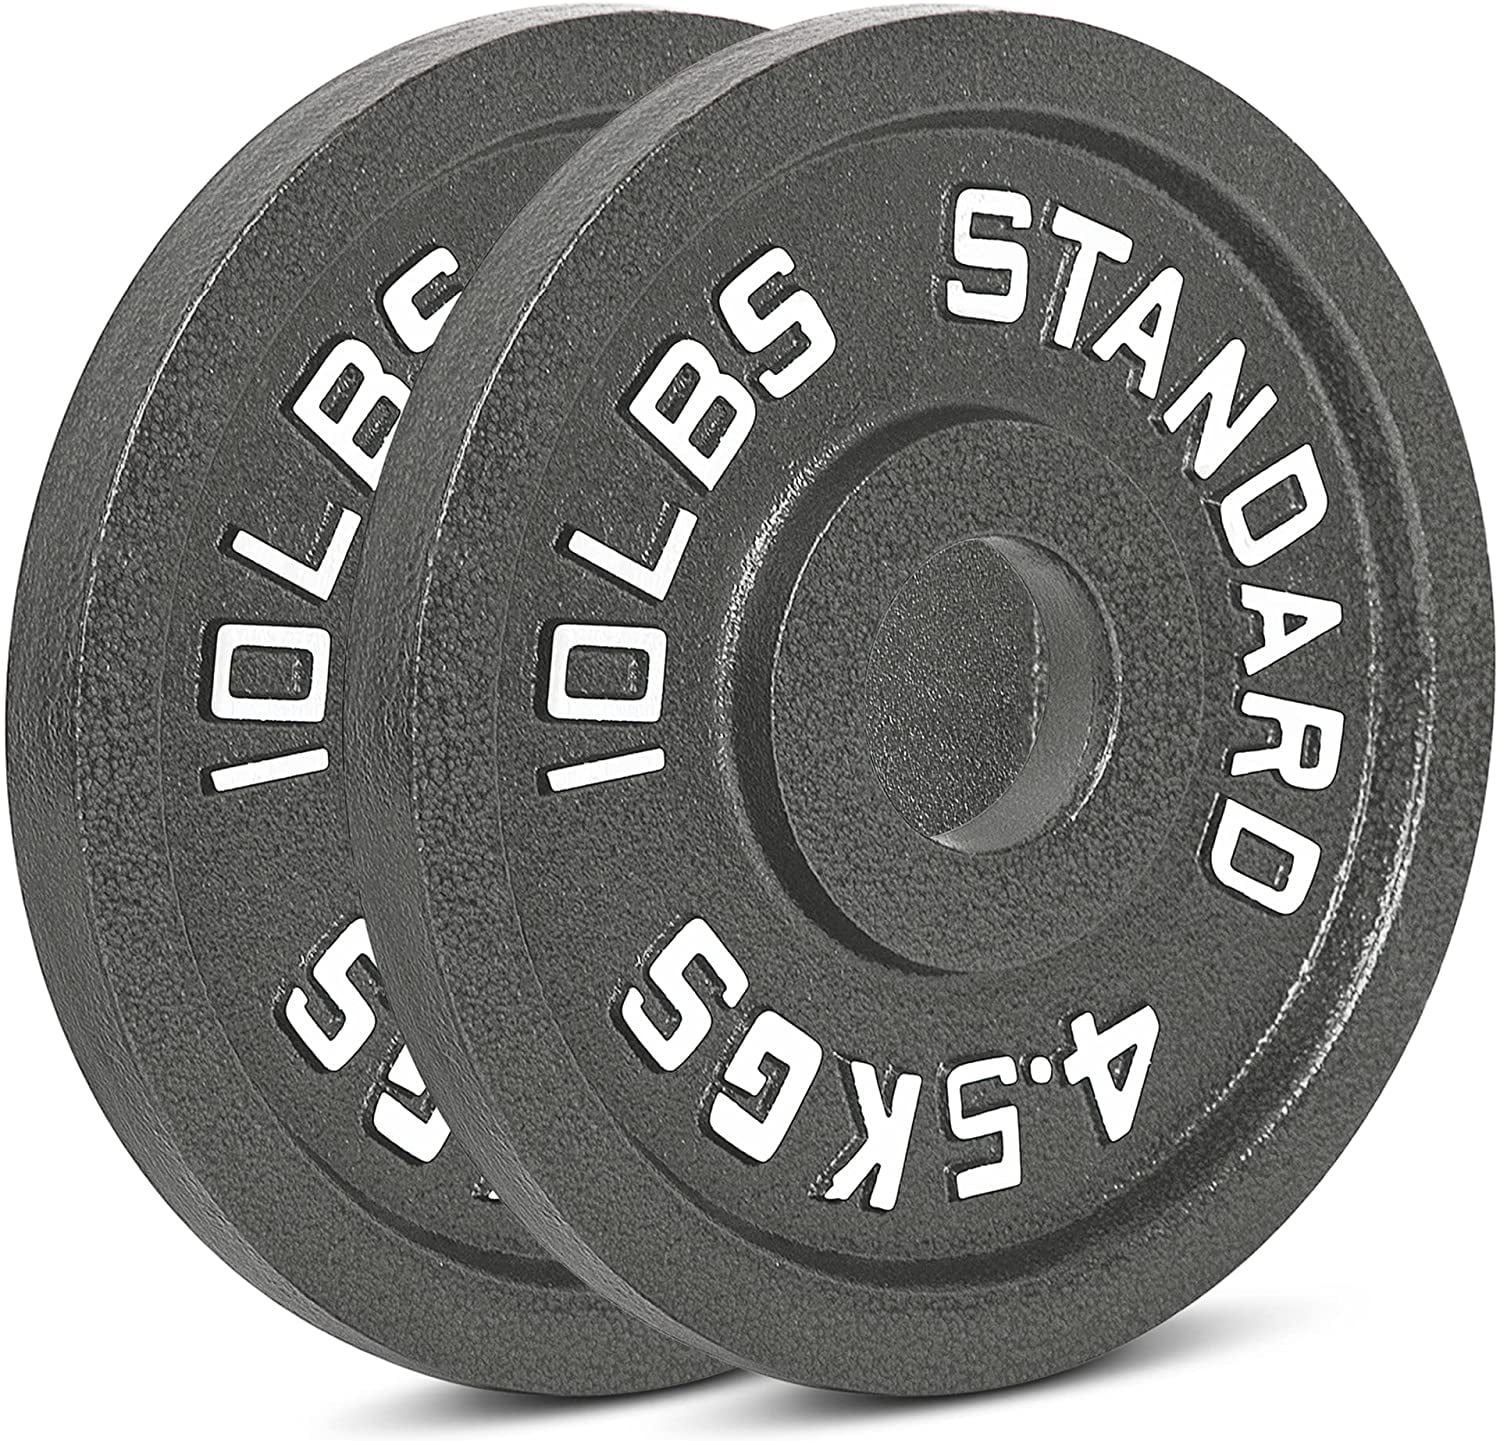 4 10LB Total 2.5LB 2" Weight Plates Weider Olympic Set of 